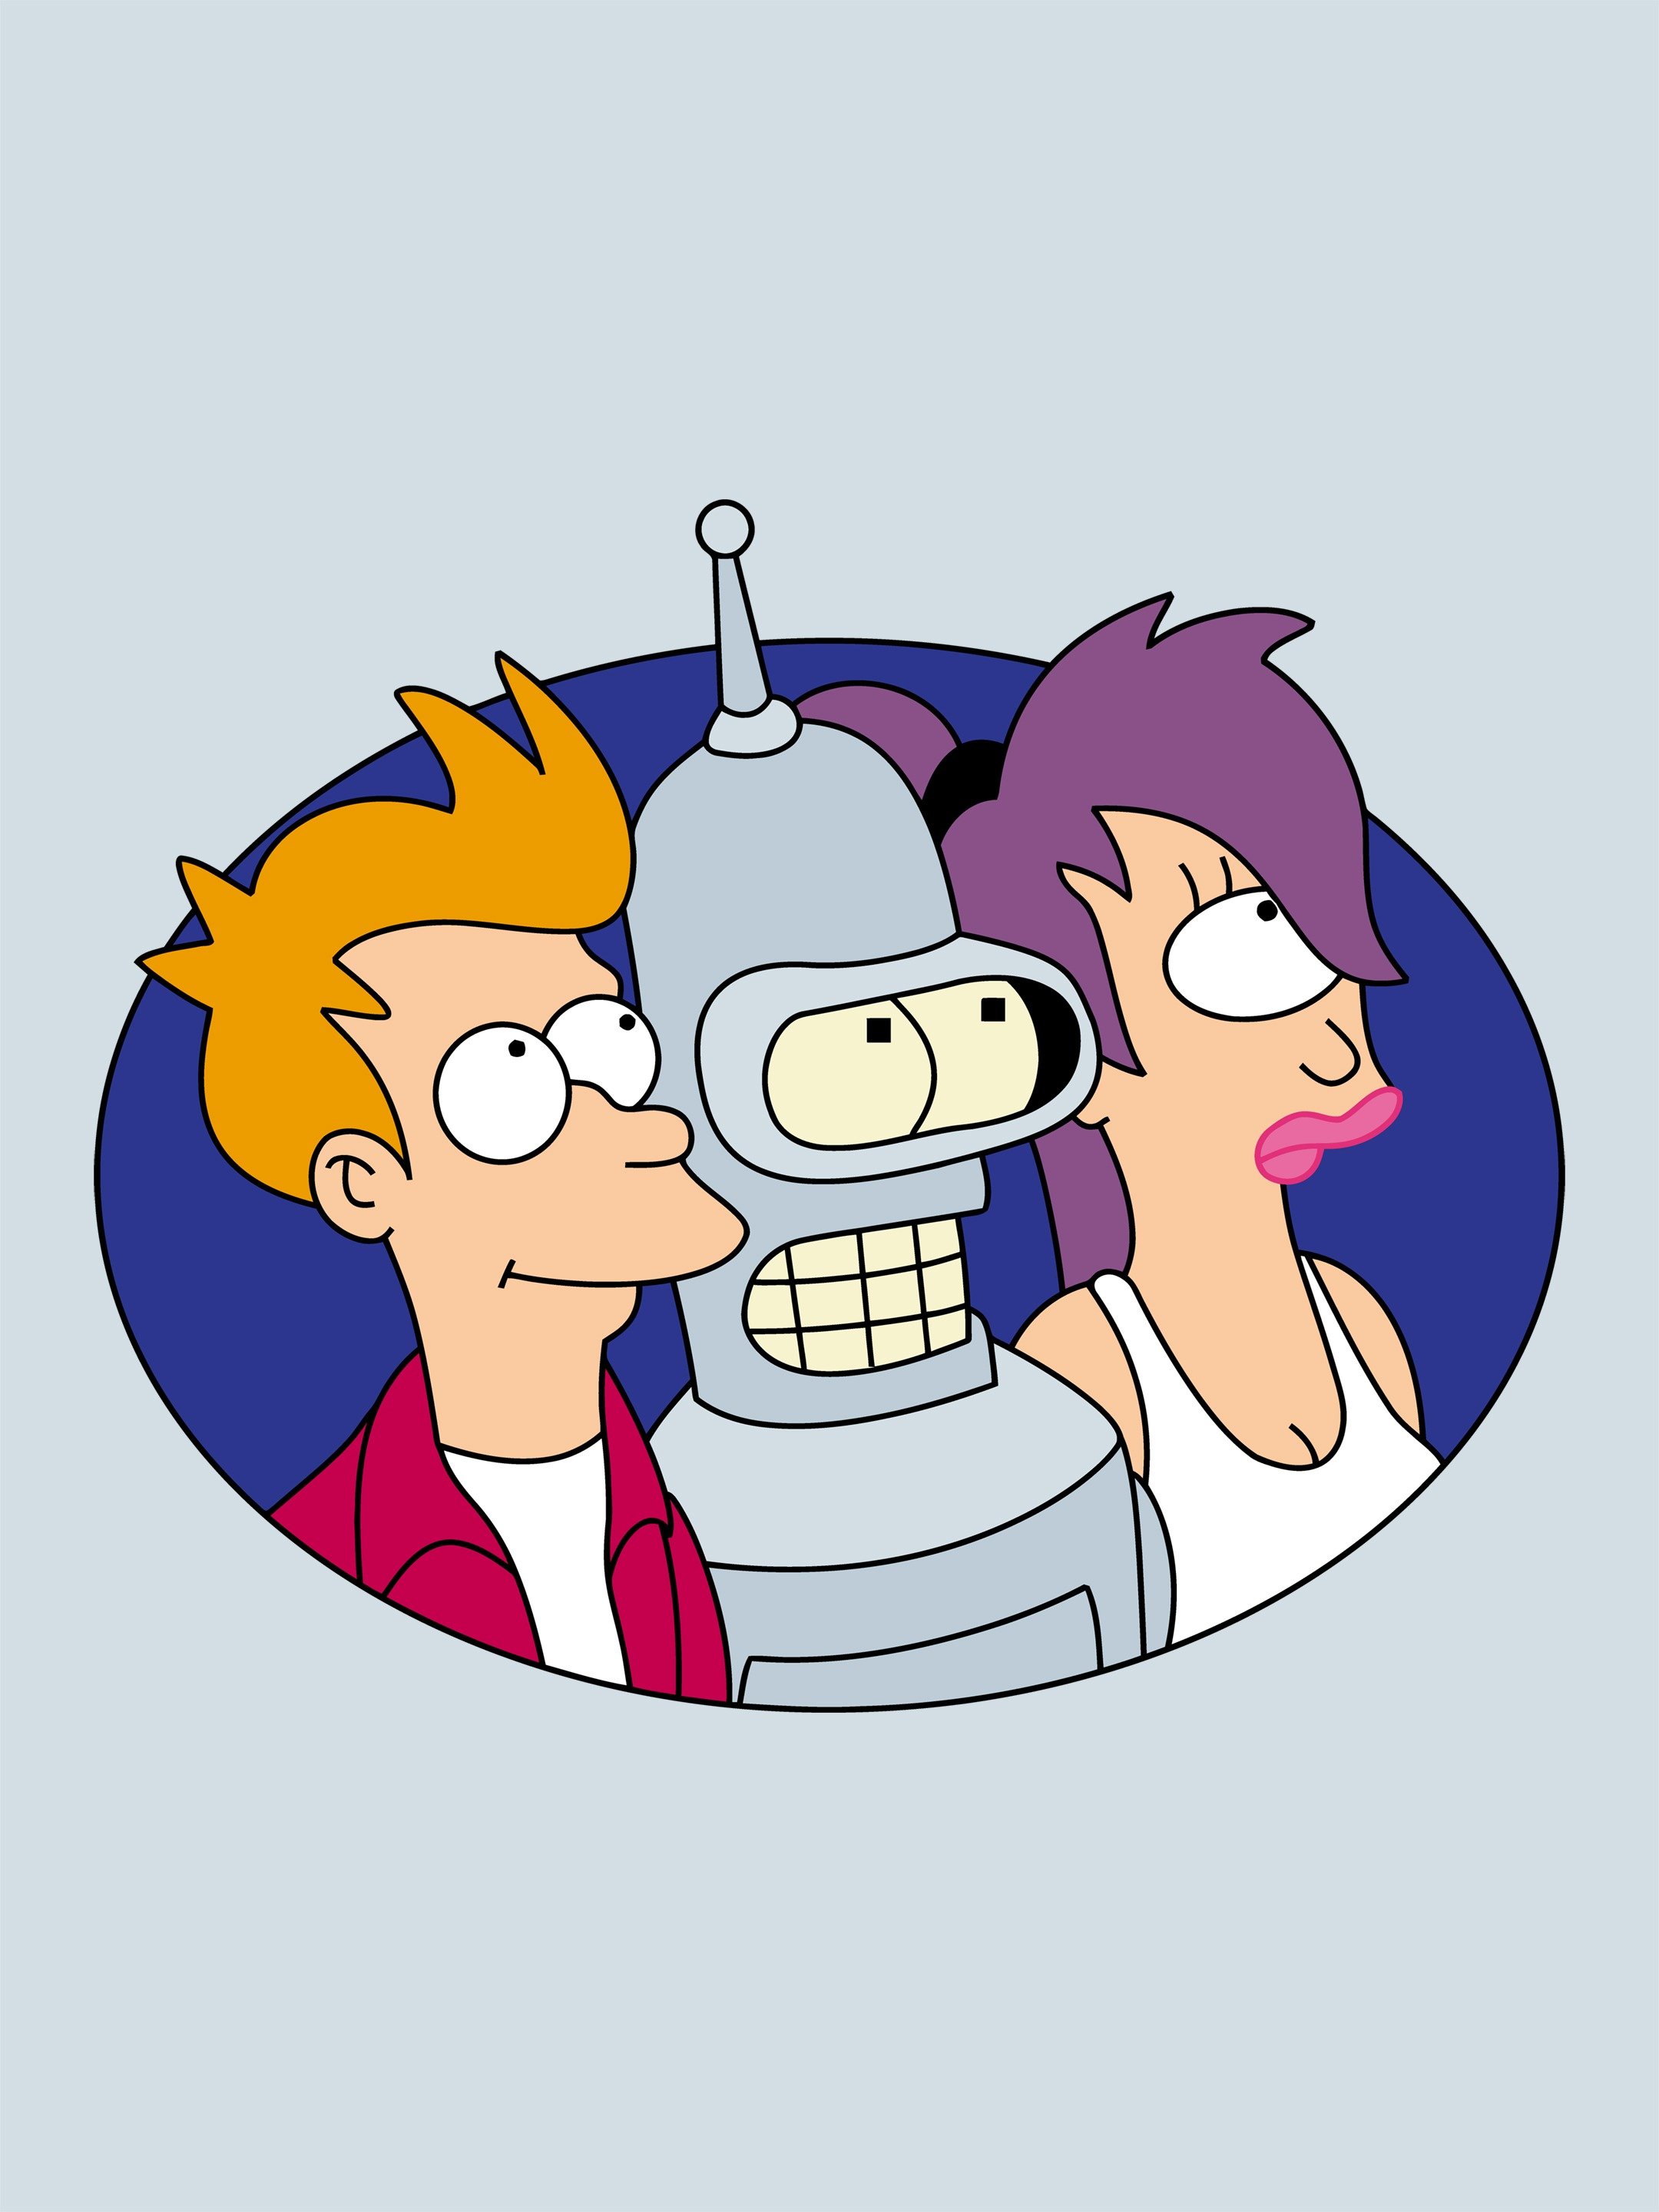 Futurama 10 Ways Fry Changed By The End Of The Series